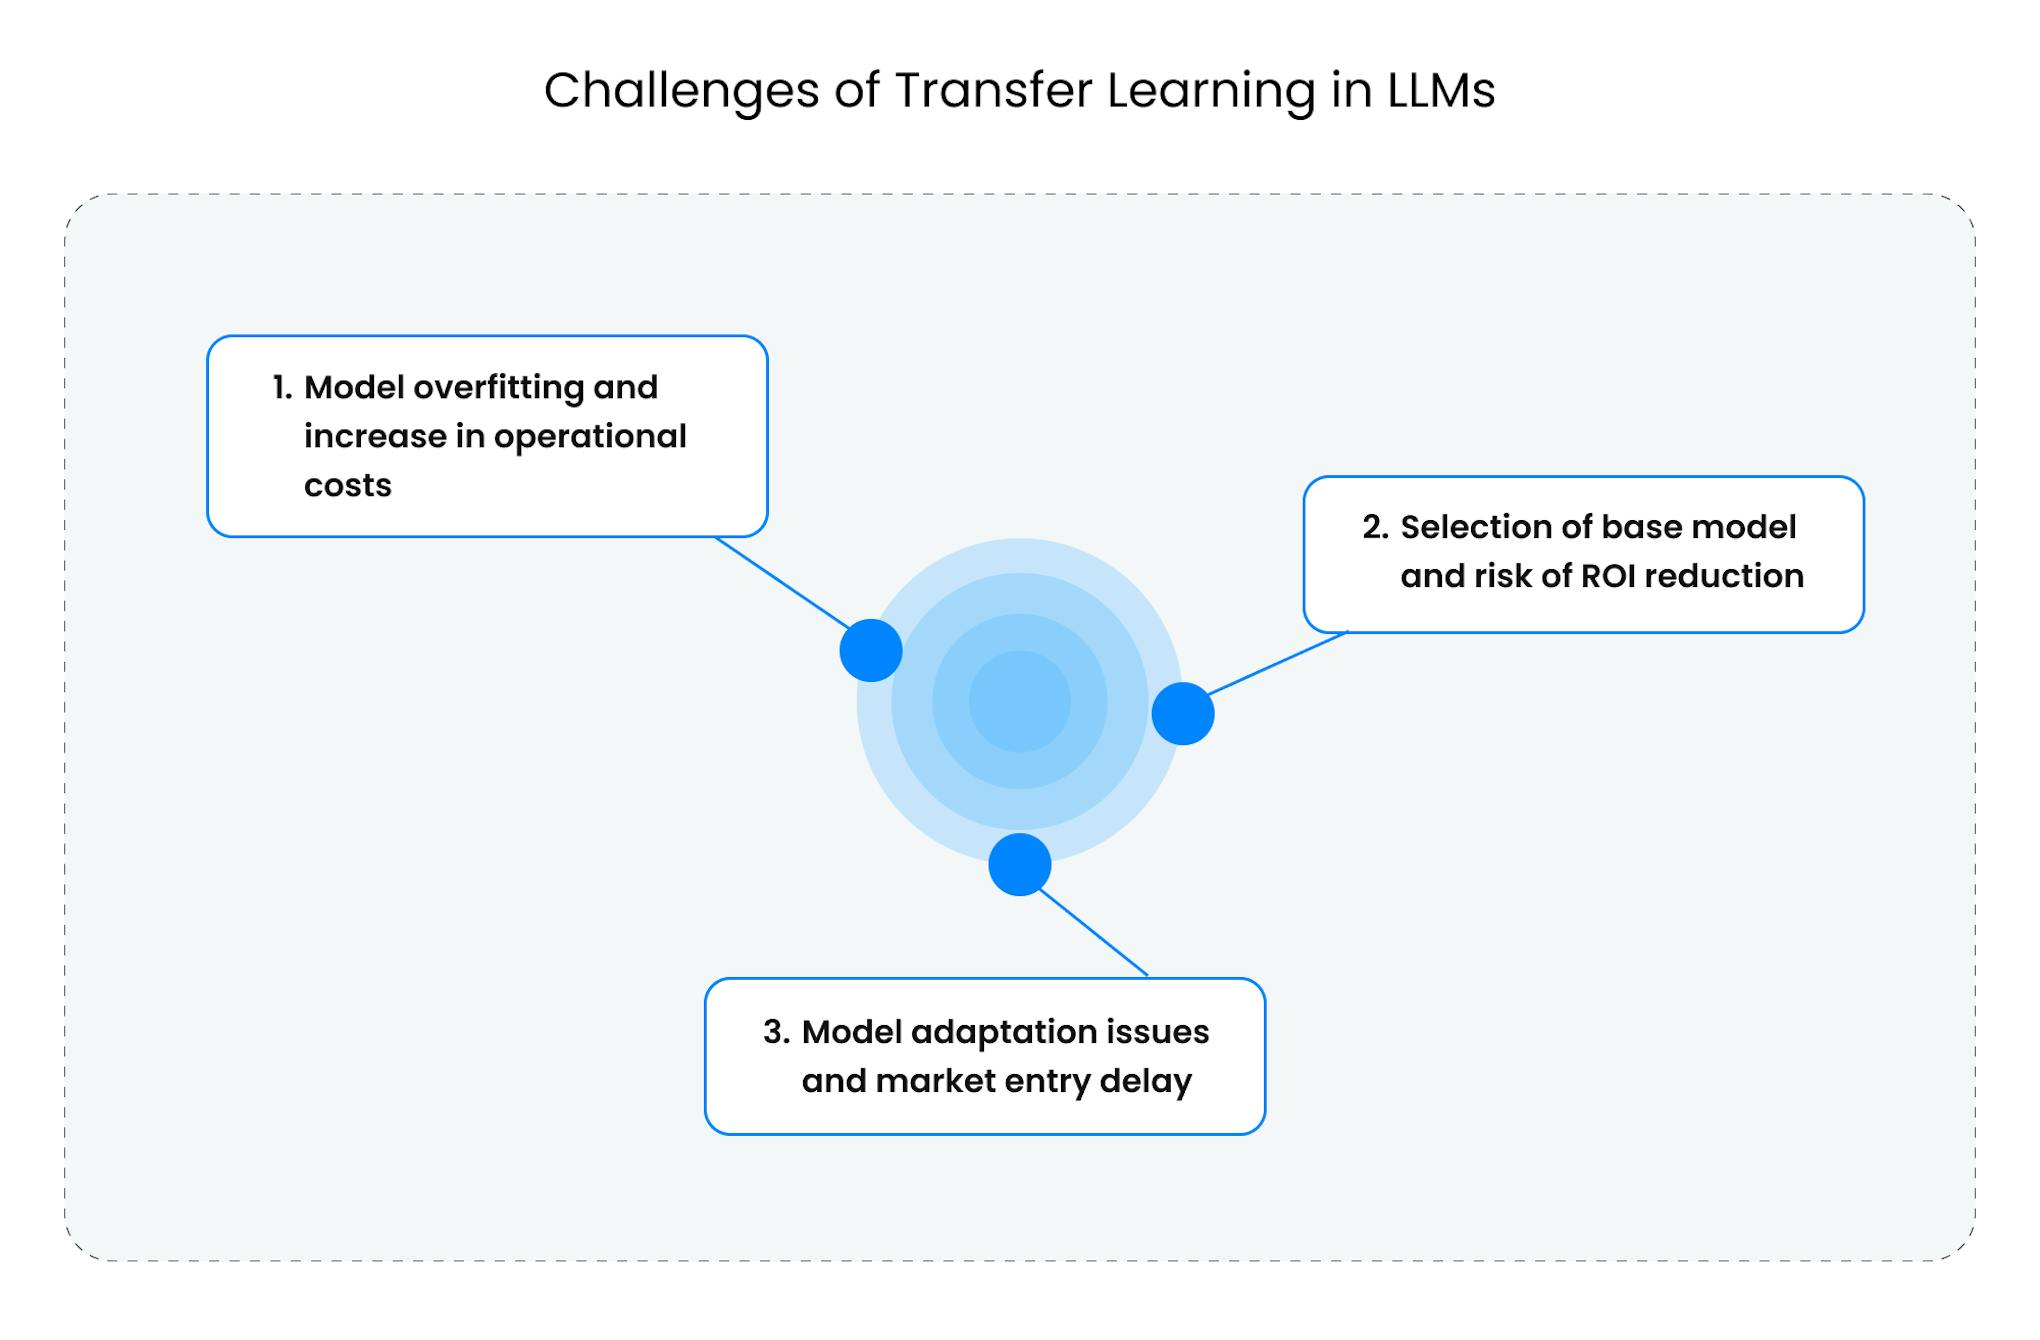 Challenges of Transfer Learning in LLMs